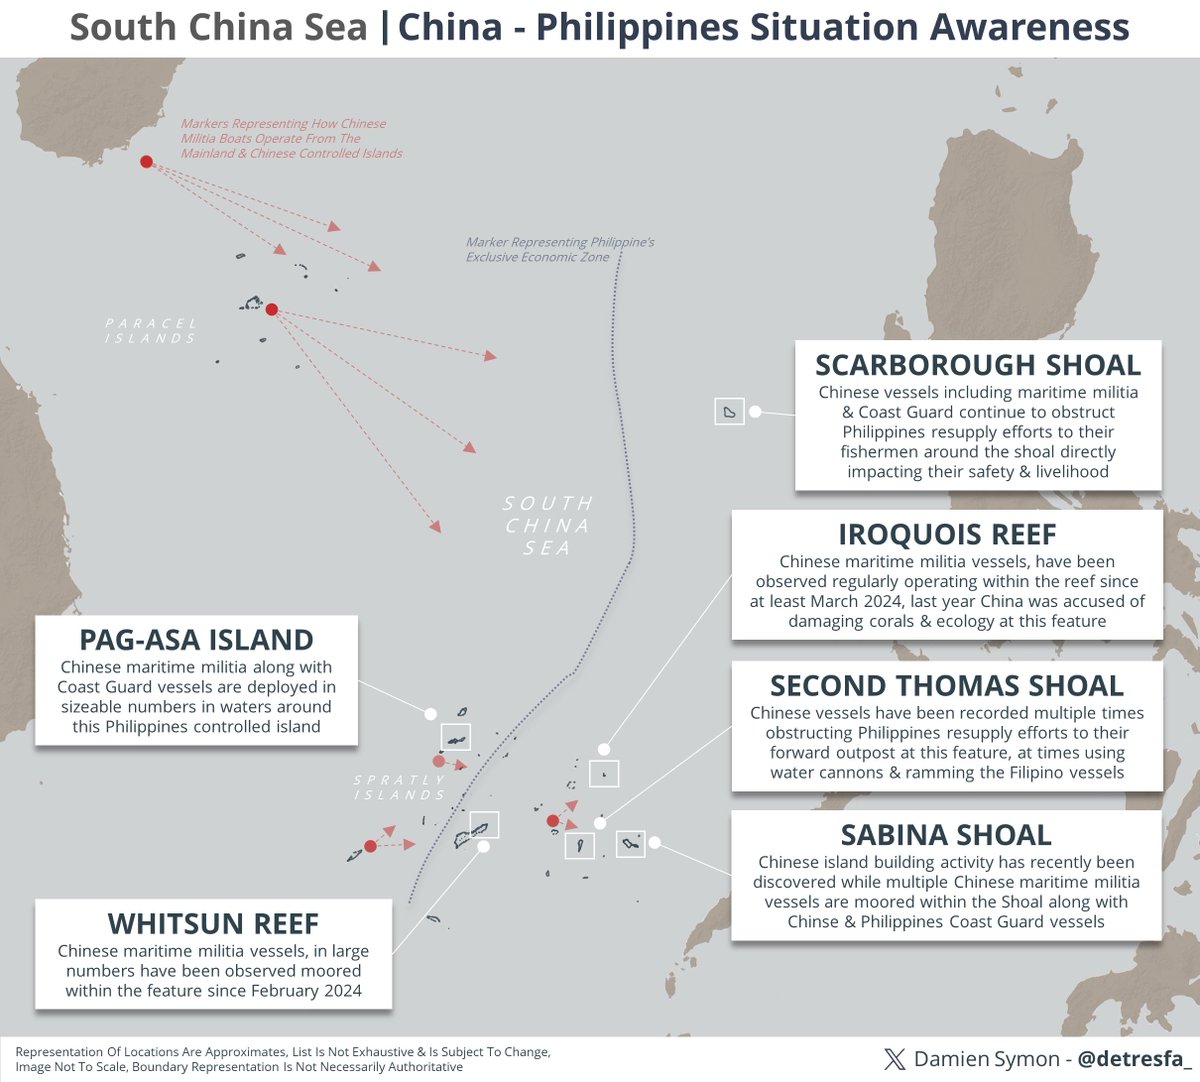 This visual attempts to highlight what's going on in the South China Sea between The Philippines & China, clubbing the current focal points of tension between both the nations this map underscores the increasing pressure & maritime aggression Beijing has directed towards Manila